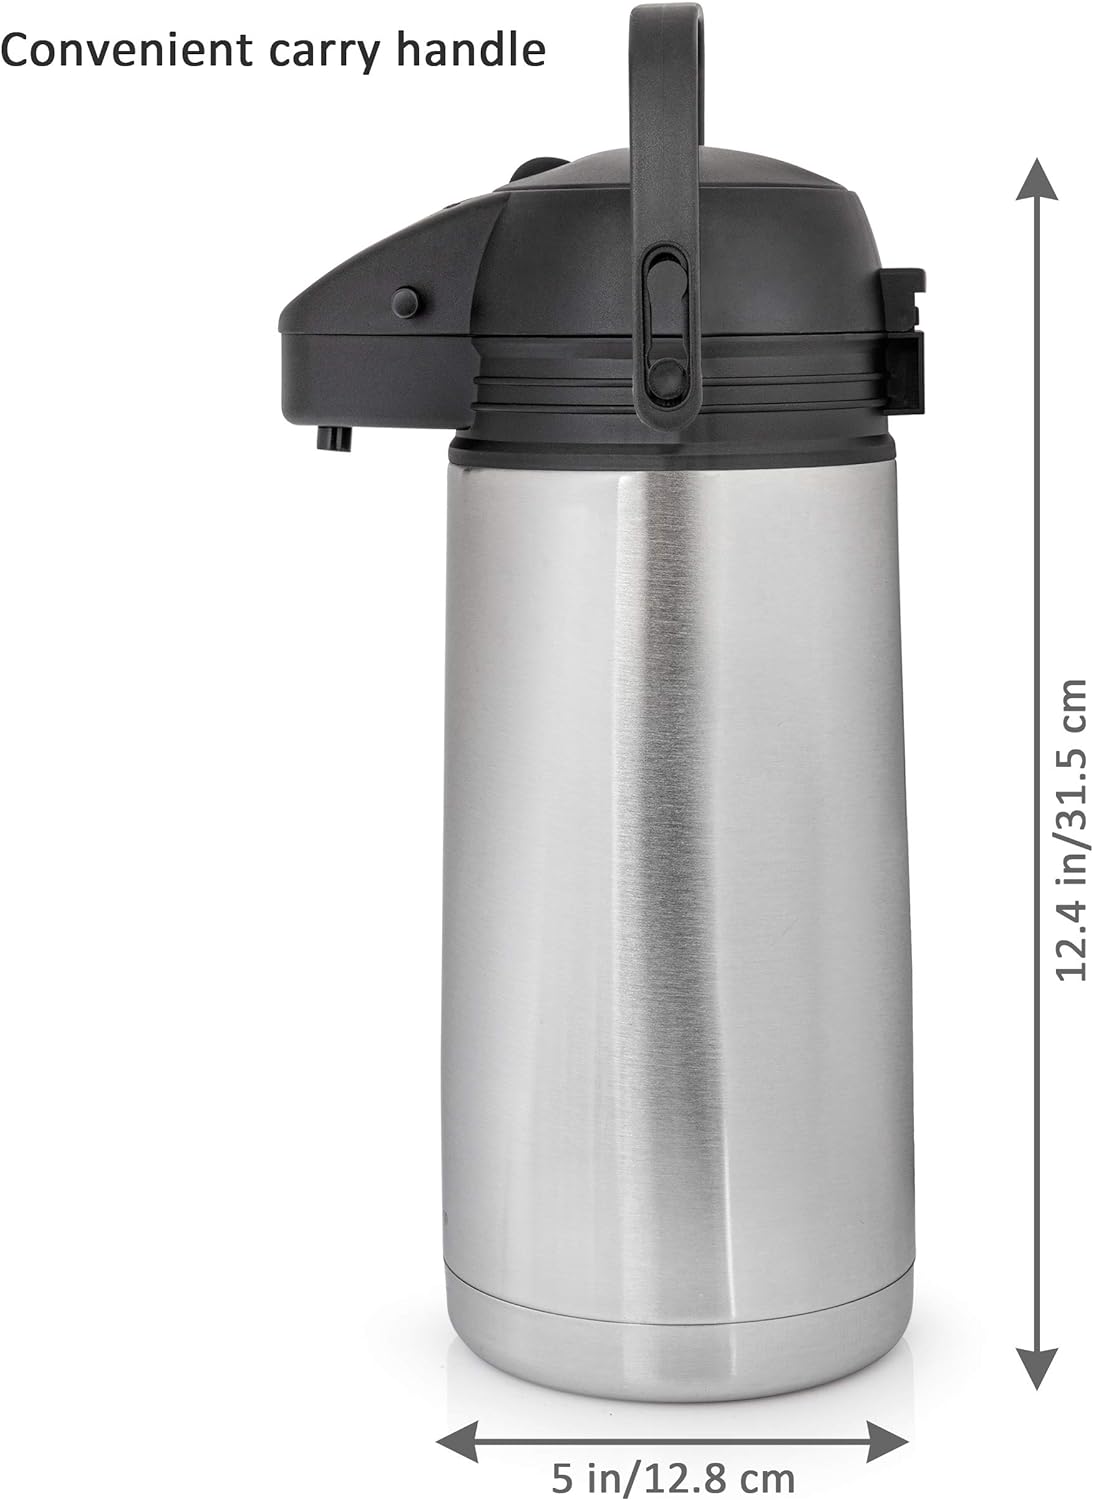 FeschDesign 64 Oz (1.9 Liter) Airpot Coffee Dispenser with Easy Push Button | BPA-Free Stainless Steel Carafe | Double-Wall Vacuum Insulate